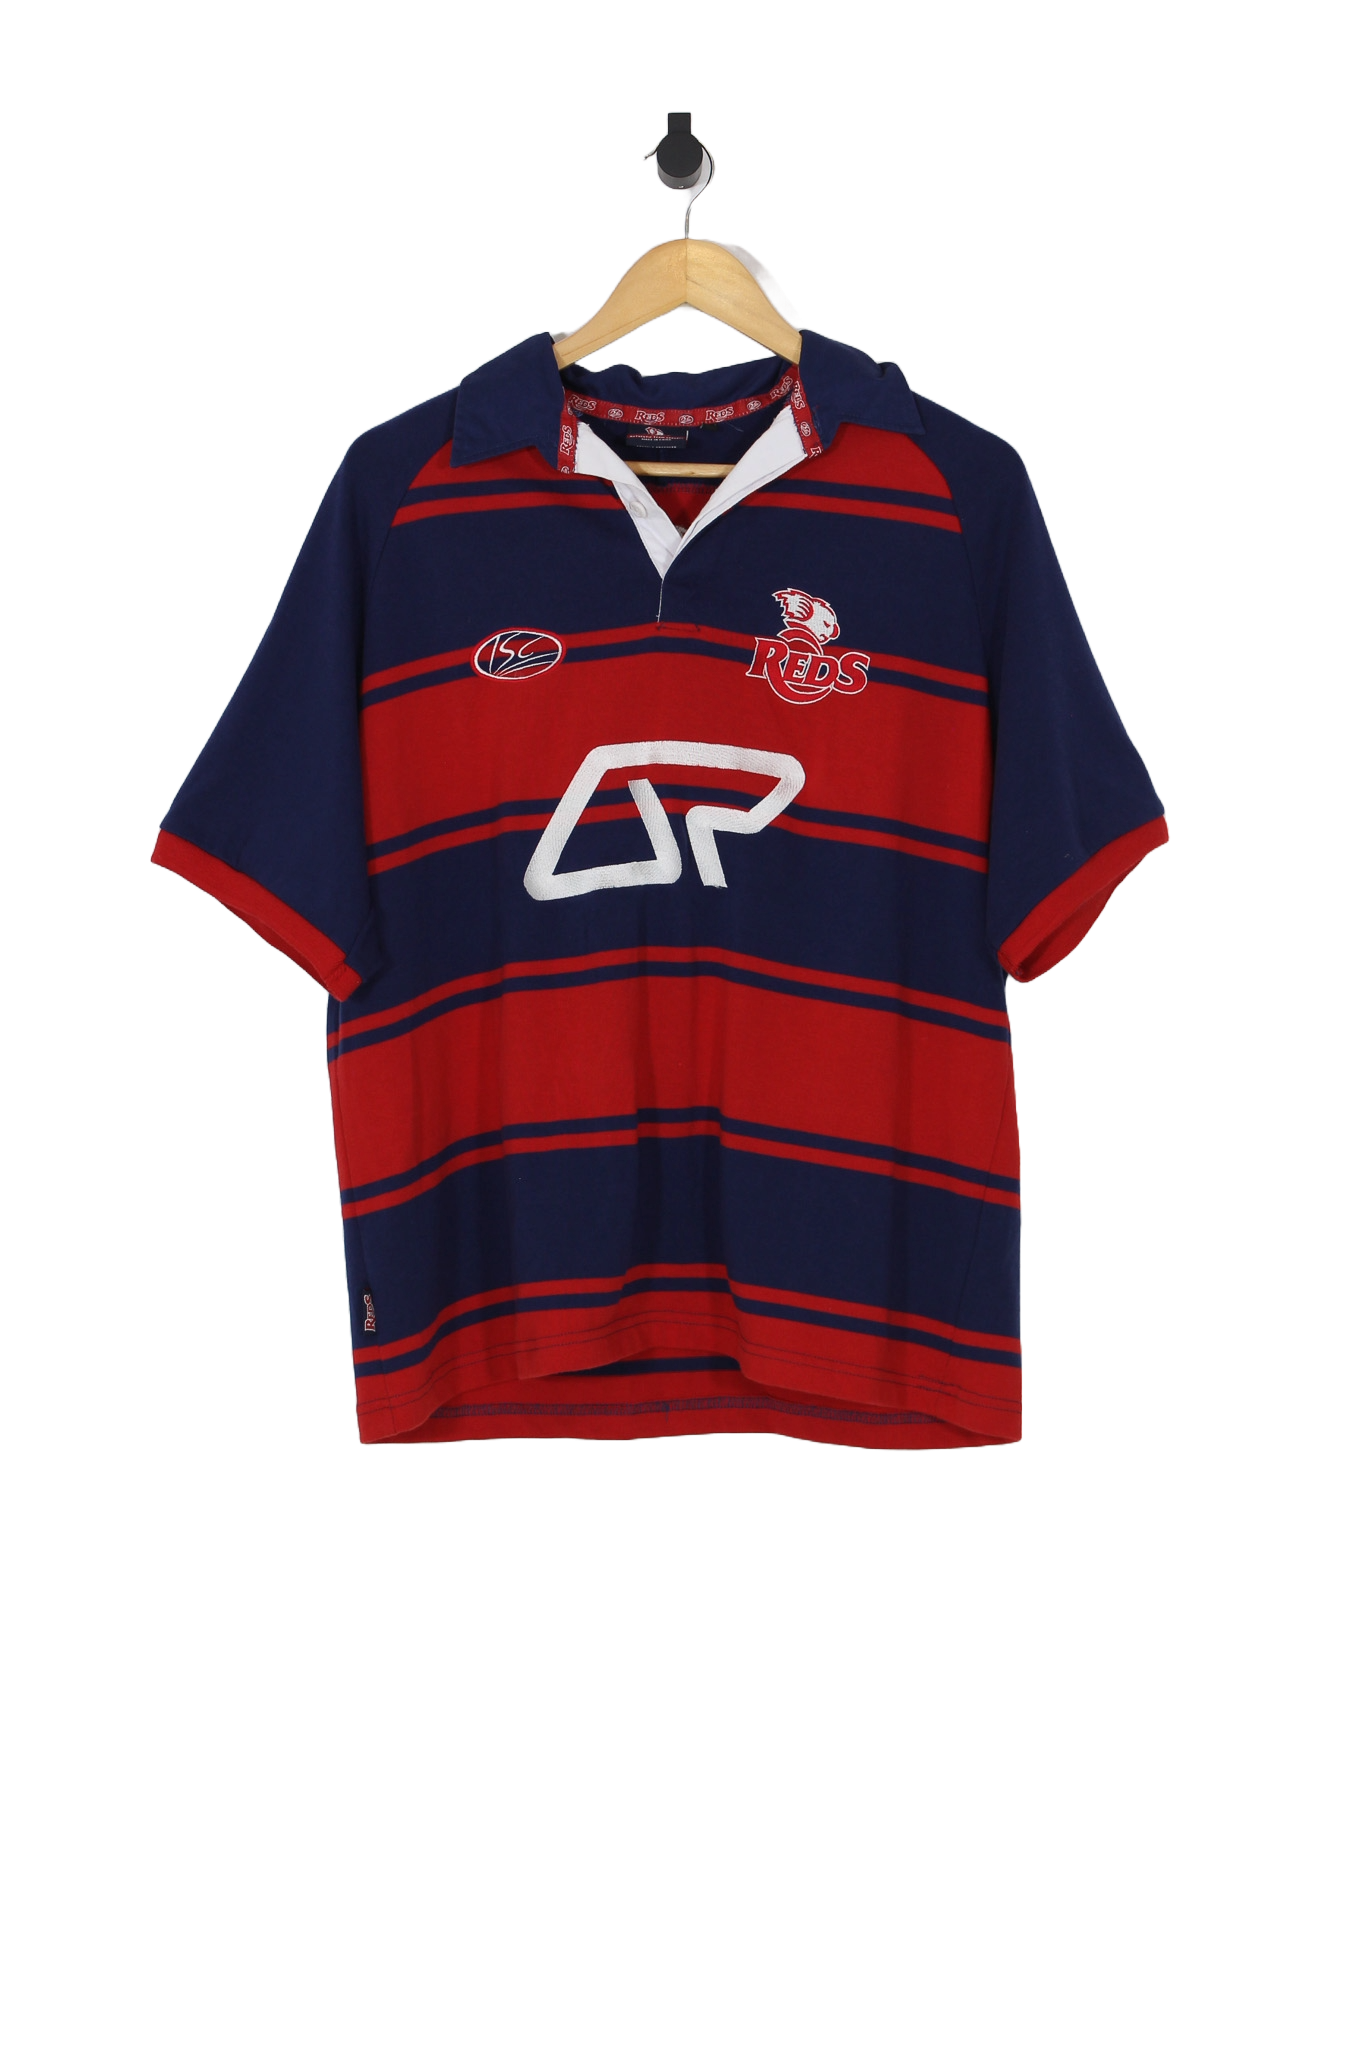 Queensland Reds Rugby Union Jersey - M